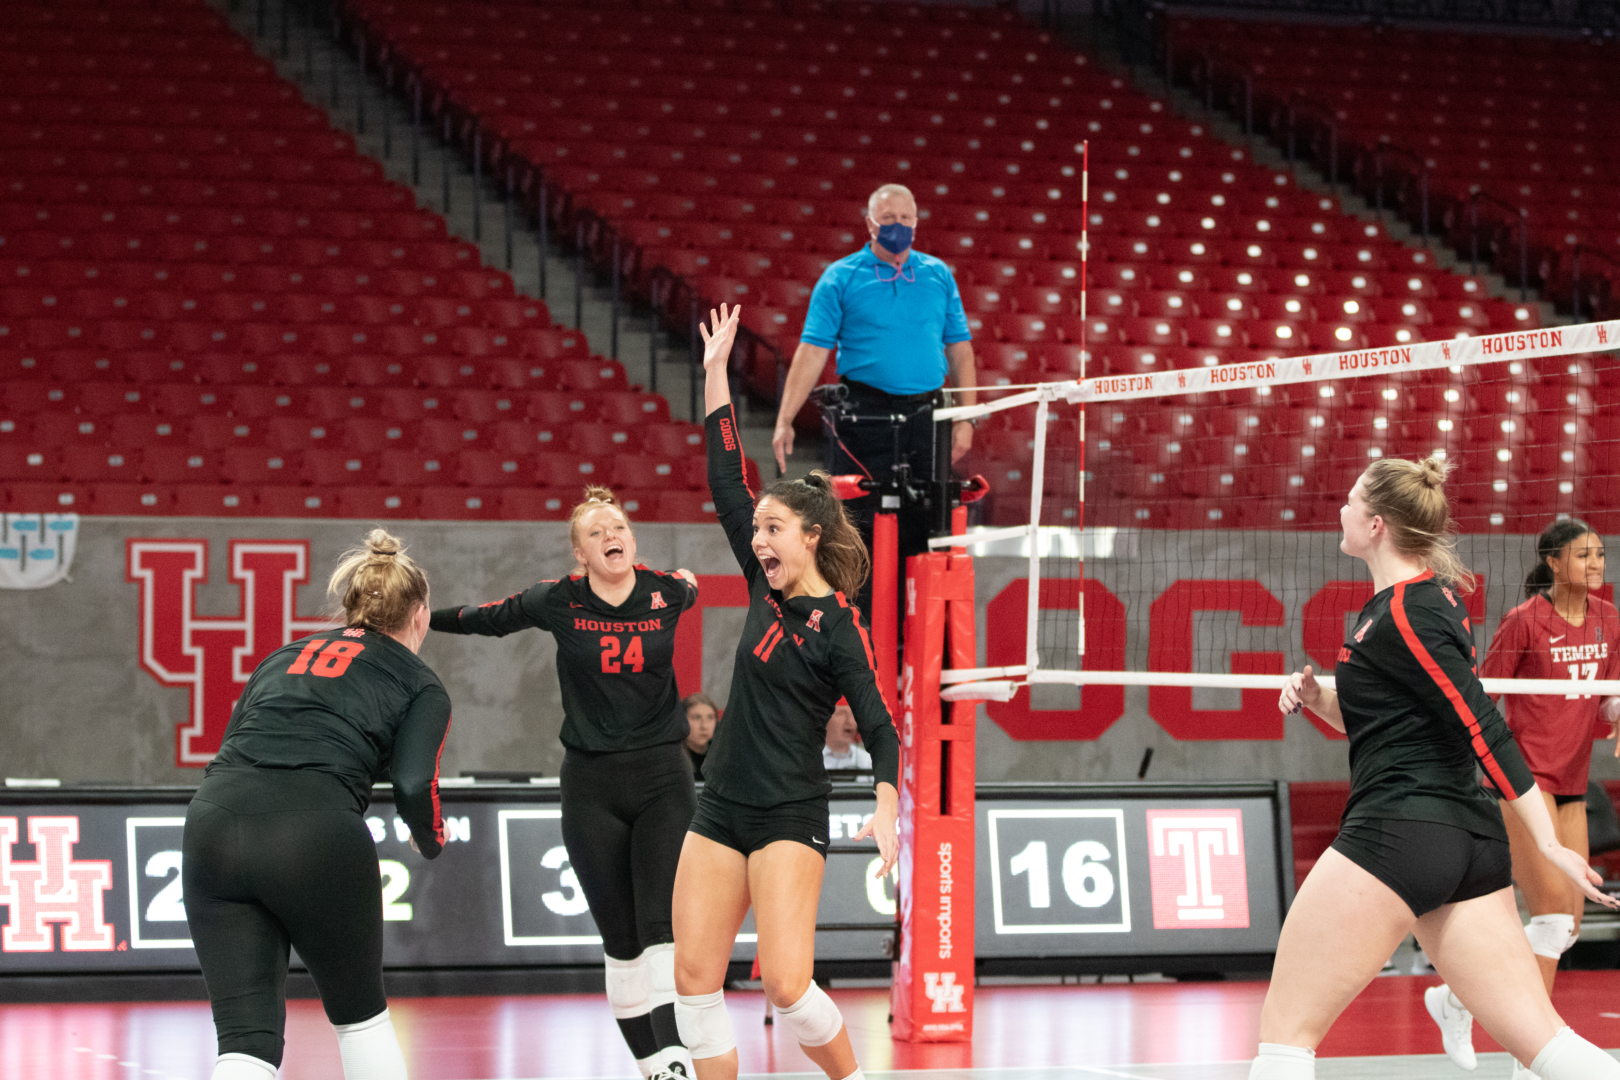 UH volleyball won its 23rd match of the season, sweeping Cincinnati on Sunday afternoon. | Esther Umoh/The Cougar